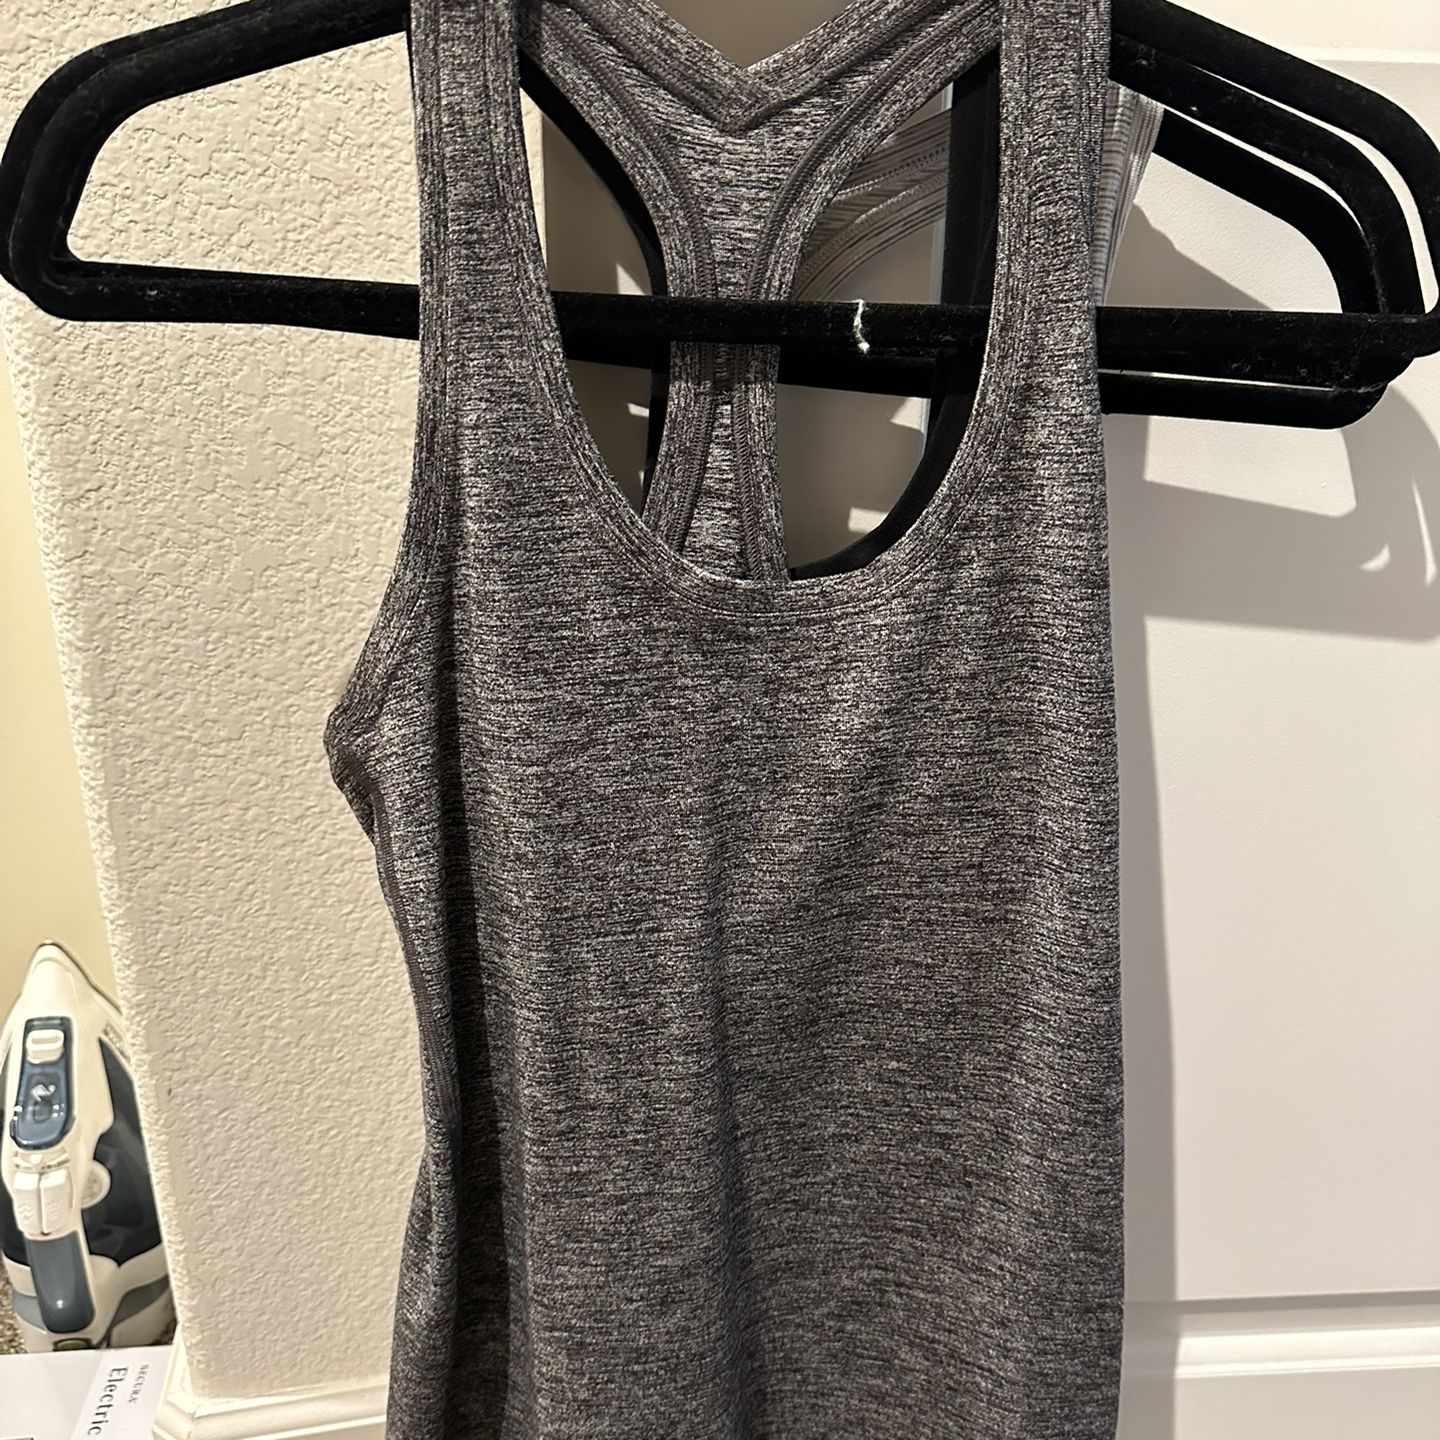 Lululemon Shirts - Different Colors Total Of 6 